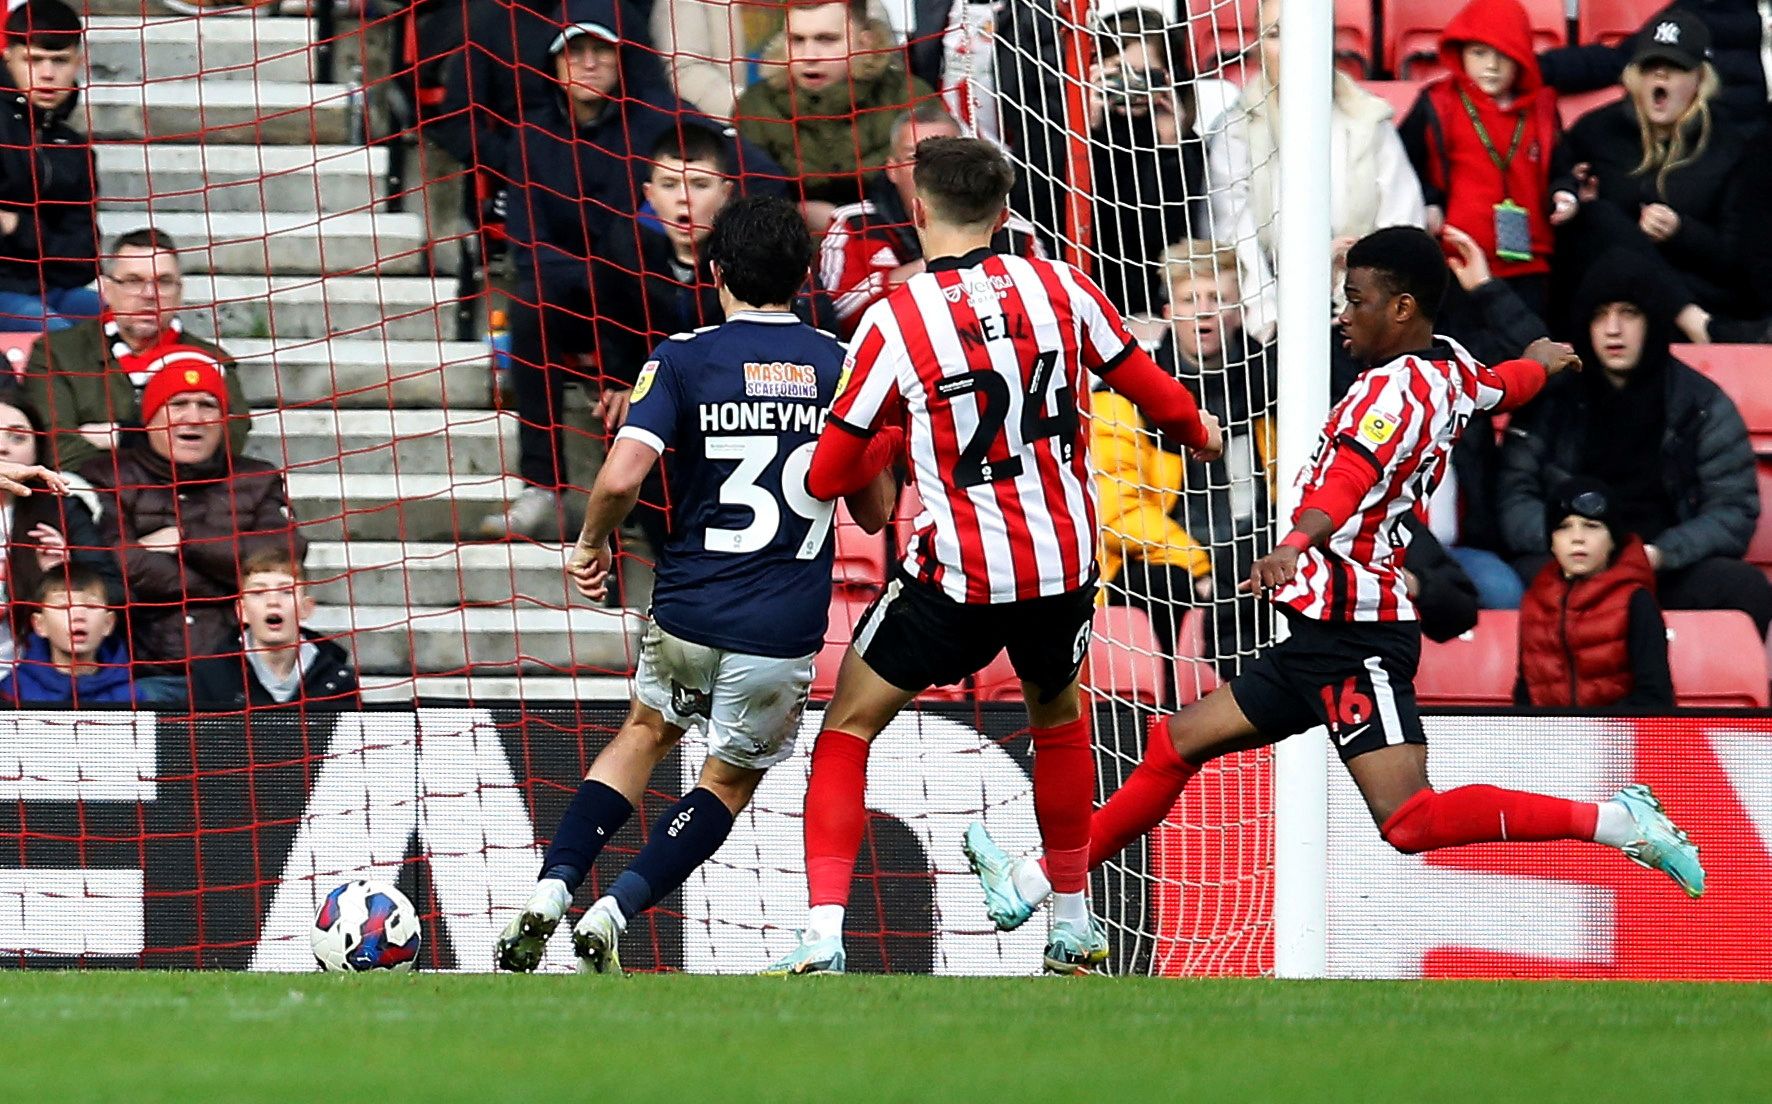 Soccer Football - Championship - Sunderland v Millwall - Stadium of Light, Sunderland, Britain - December 3, 2022  Sunderland's Amad Diallo scores their first goal  Action Images/Craig Brough  EDITORIAL USE ONLY. No use with unauthorized audio, video, data, fixture lists, club/league logos or 